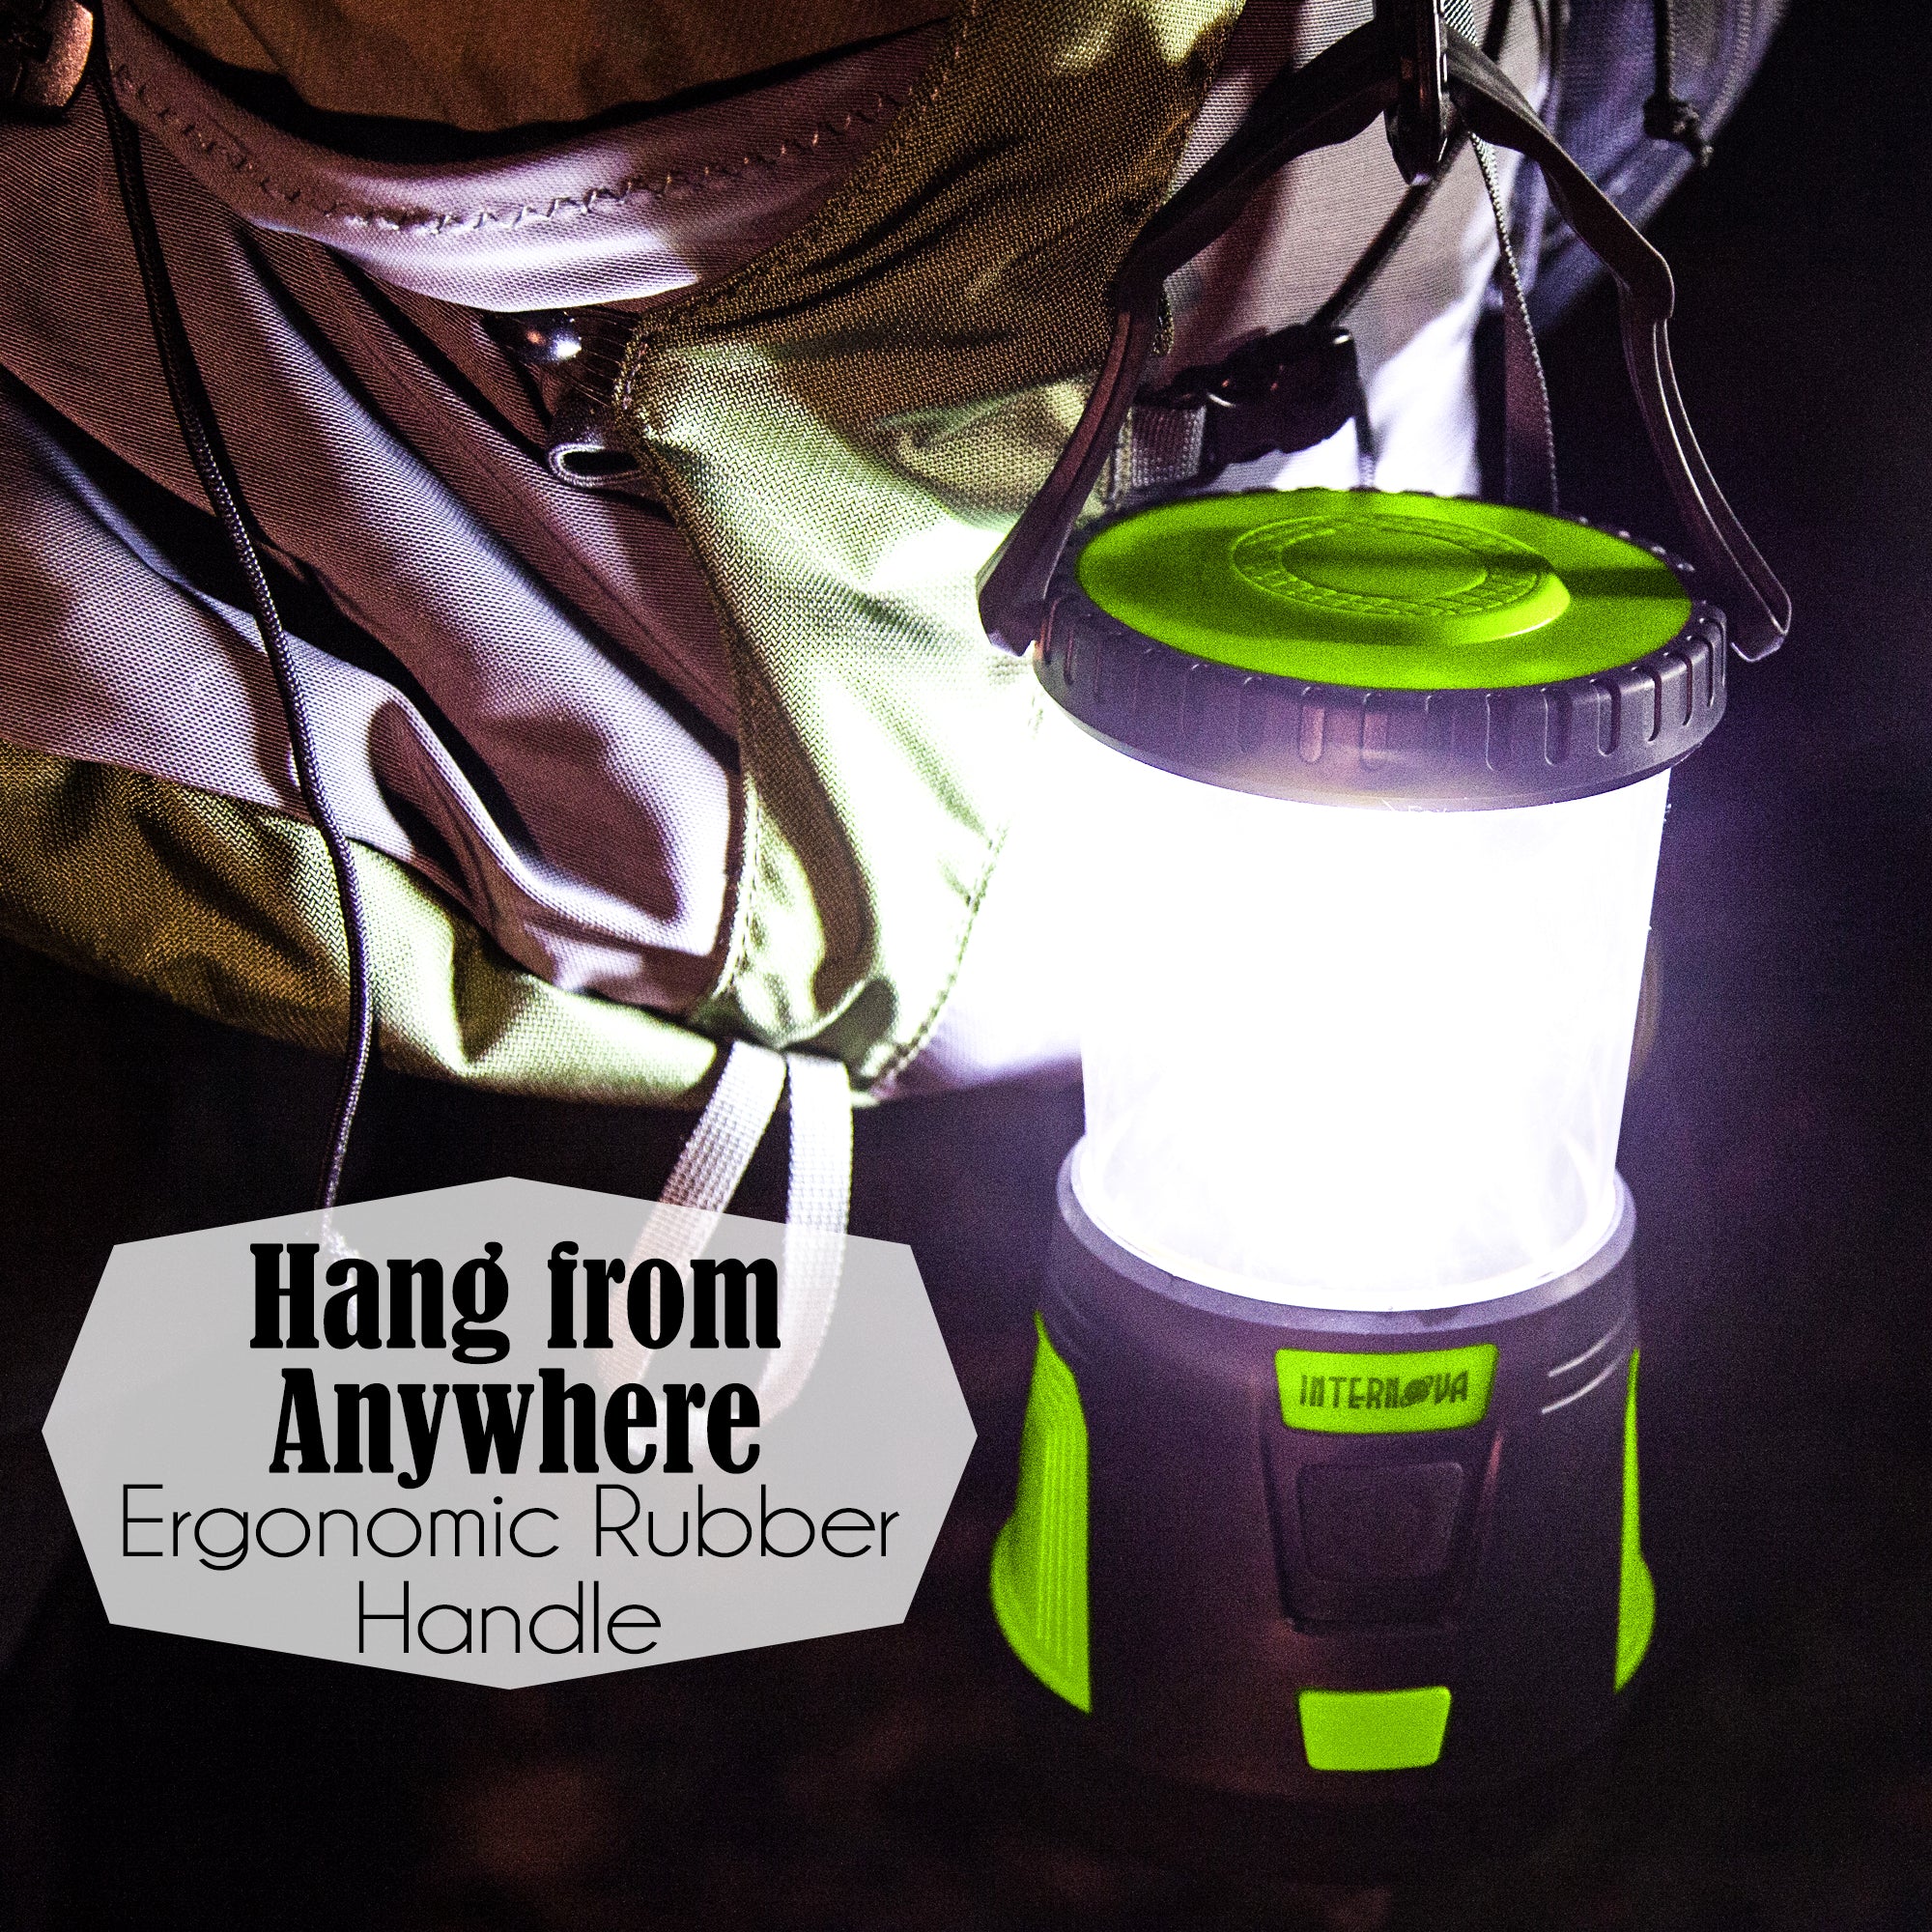 LE Battery Operated Camping Lanterns Dimmable 3 Modes ourdoor